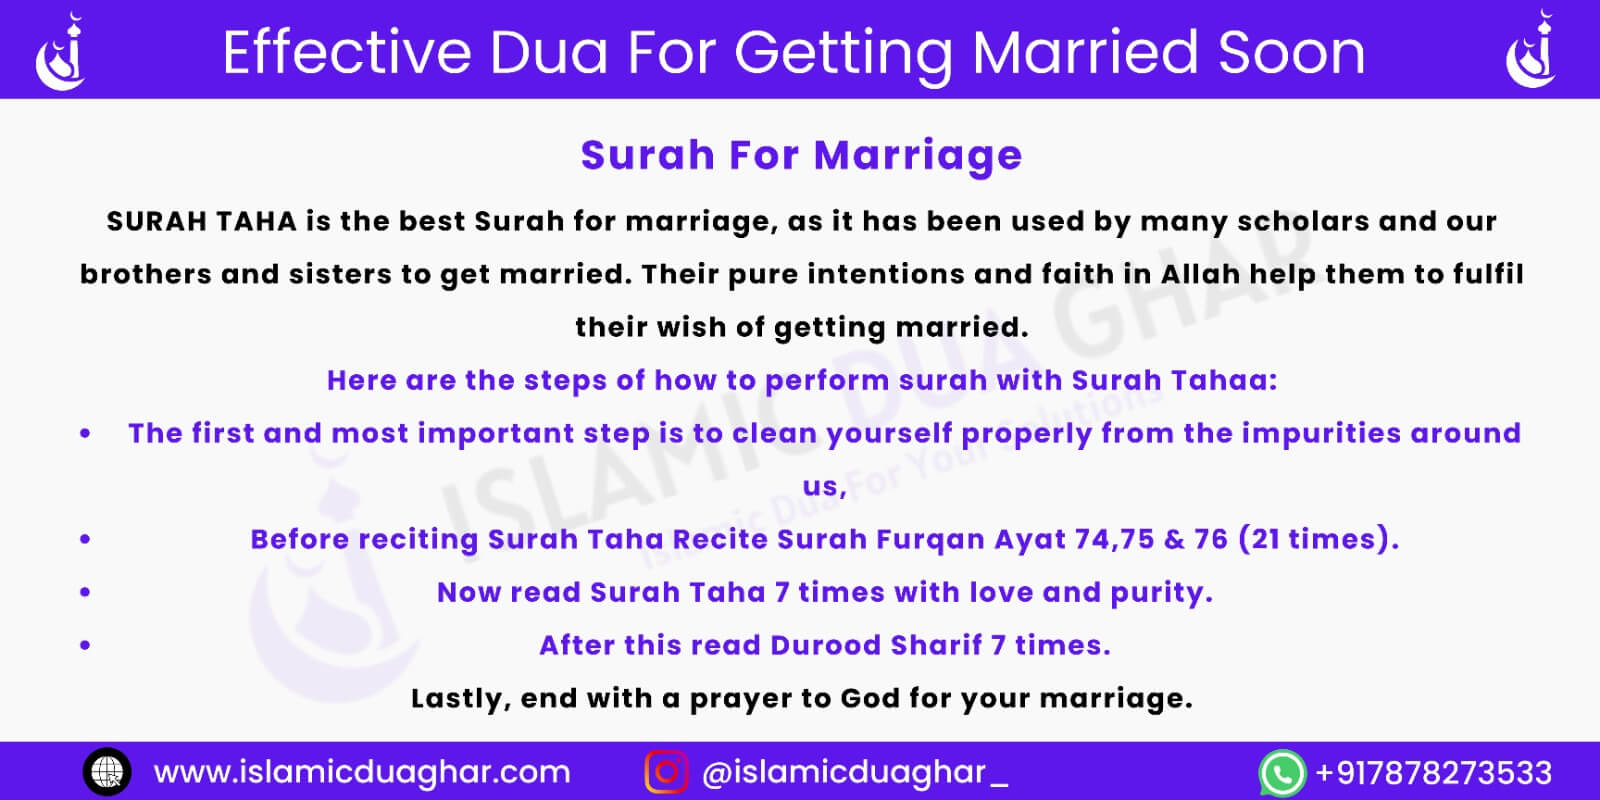 Dua For Getting Married Soon